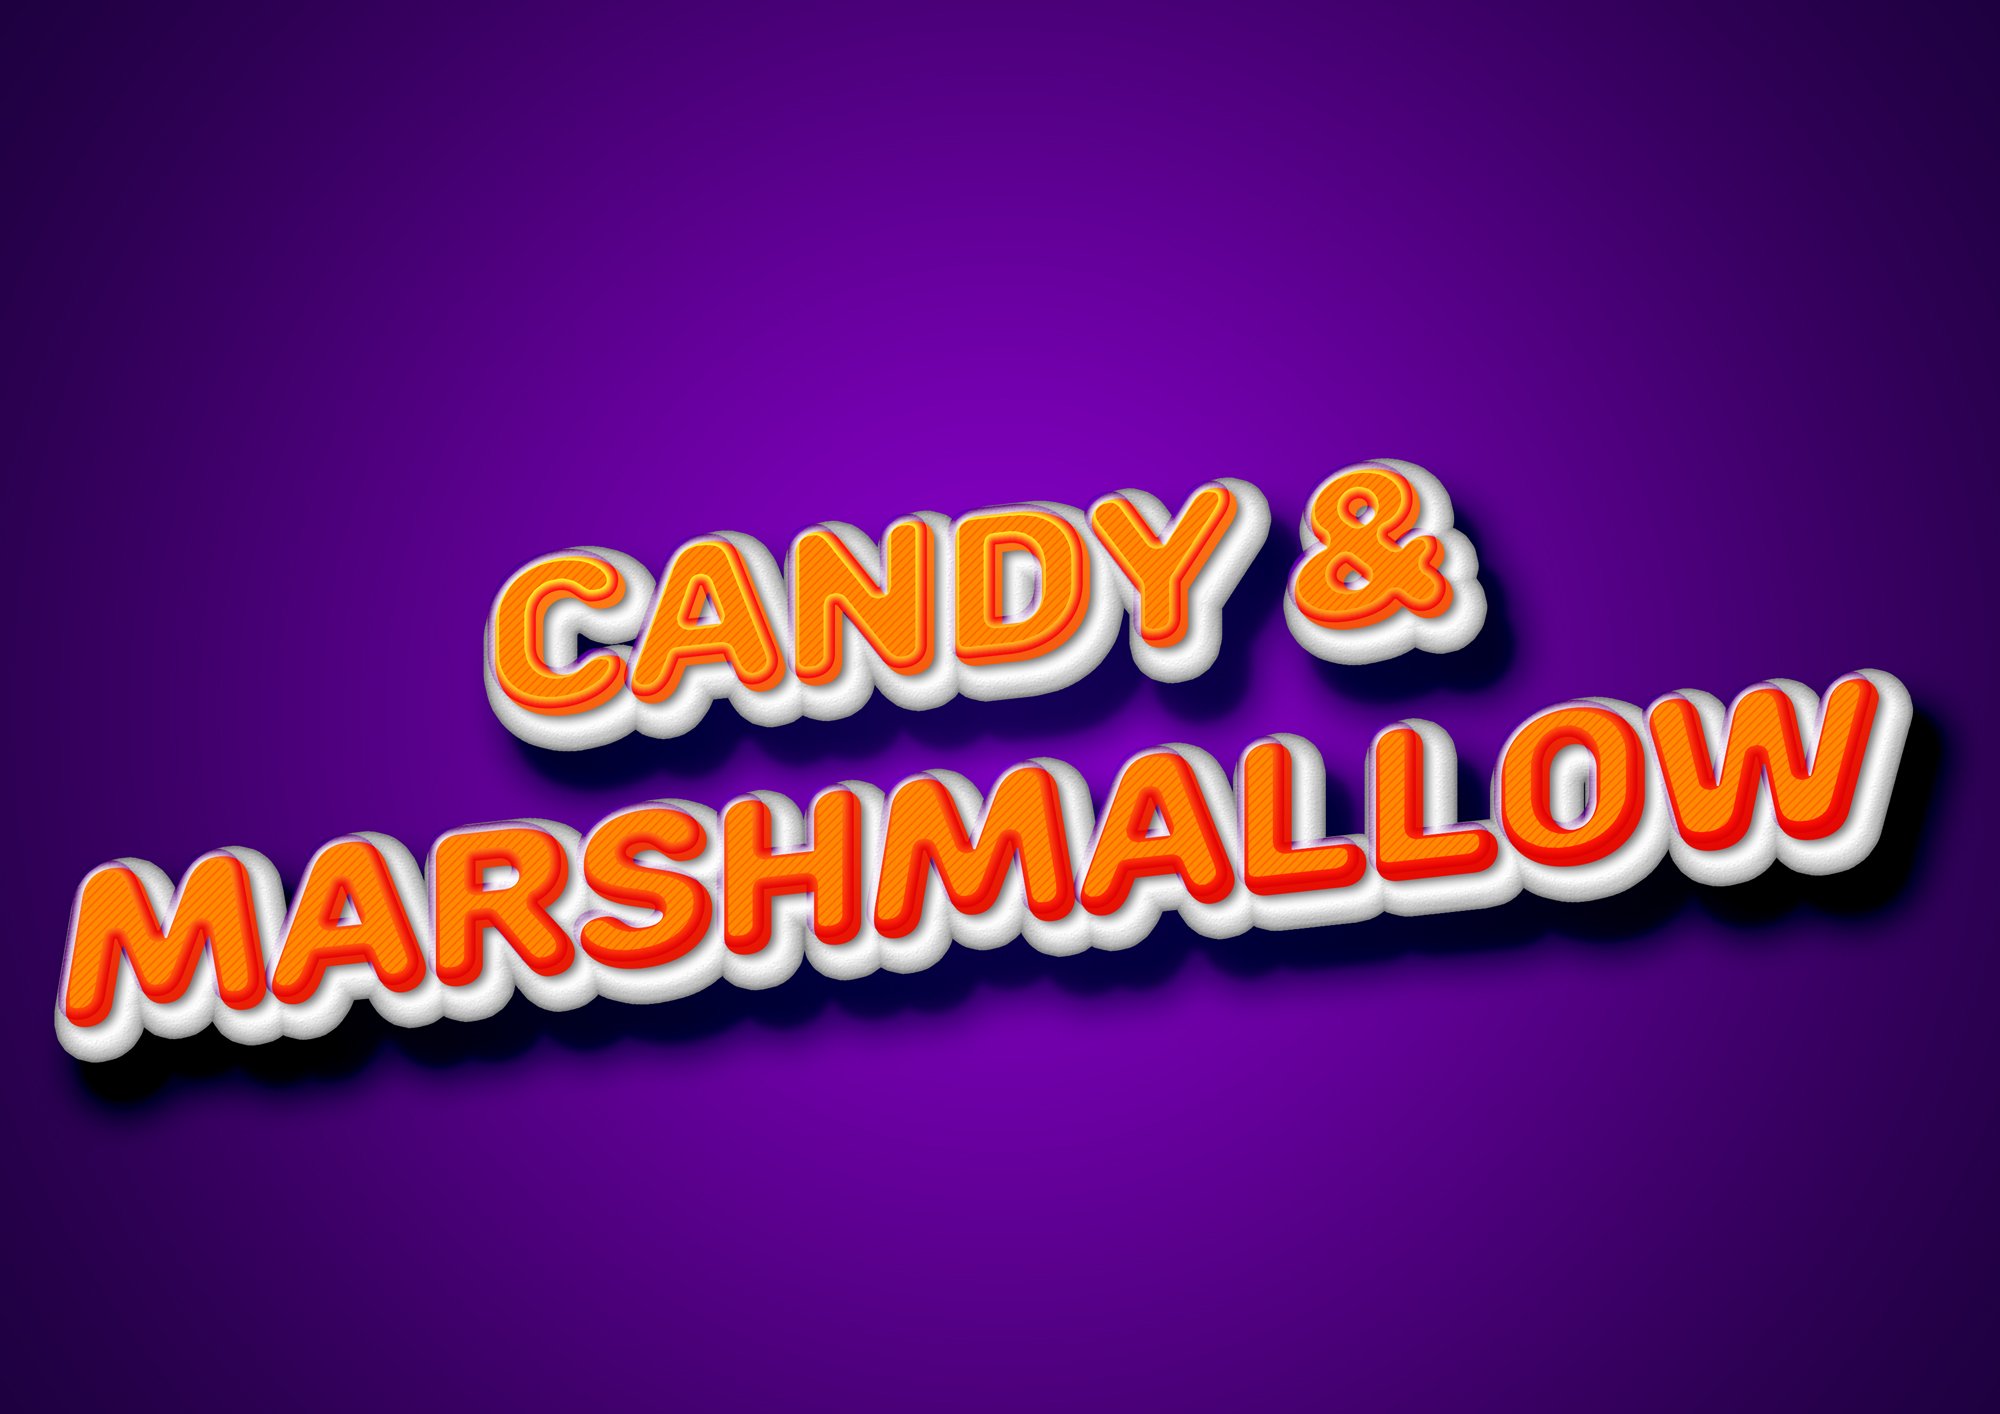 Candy and Marshmallow. Text effect.cover image.